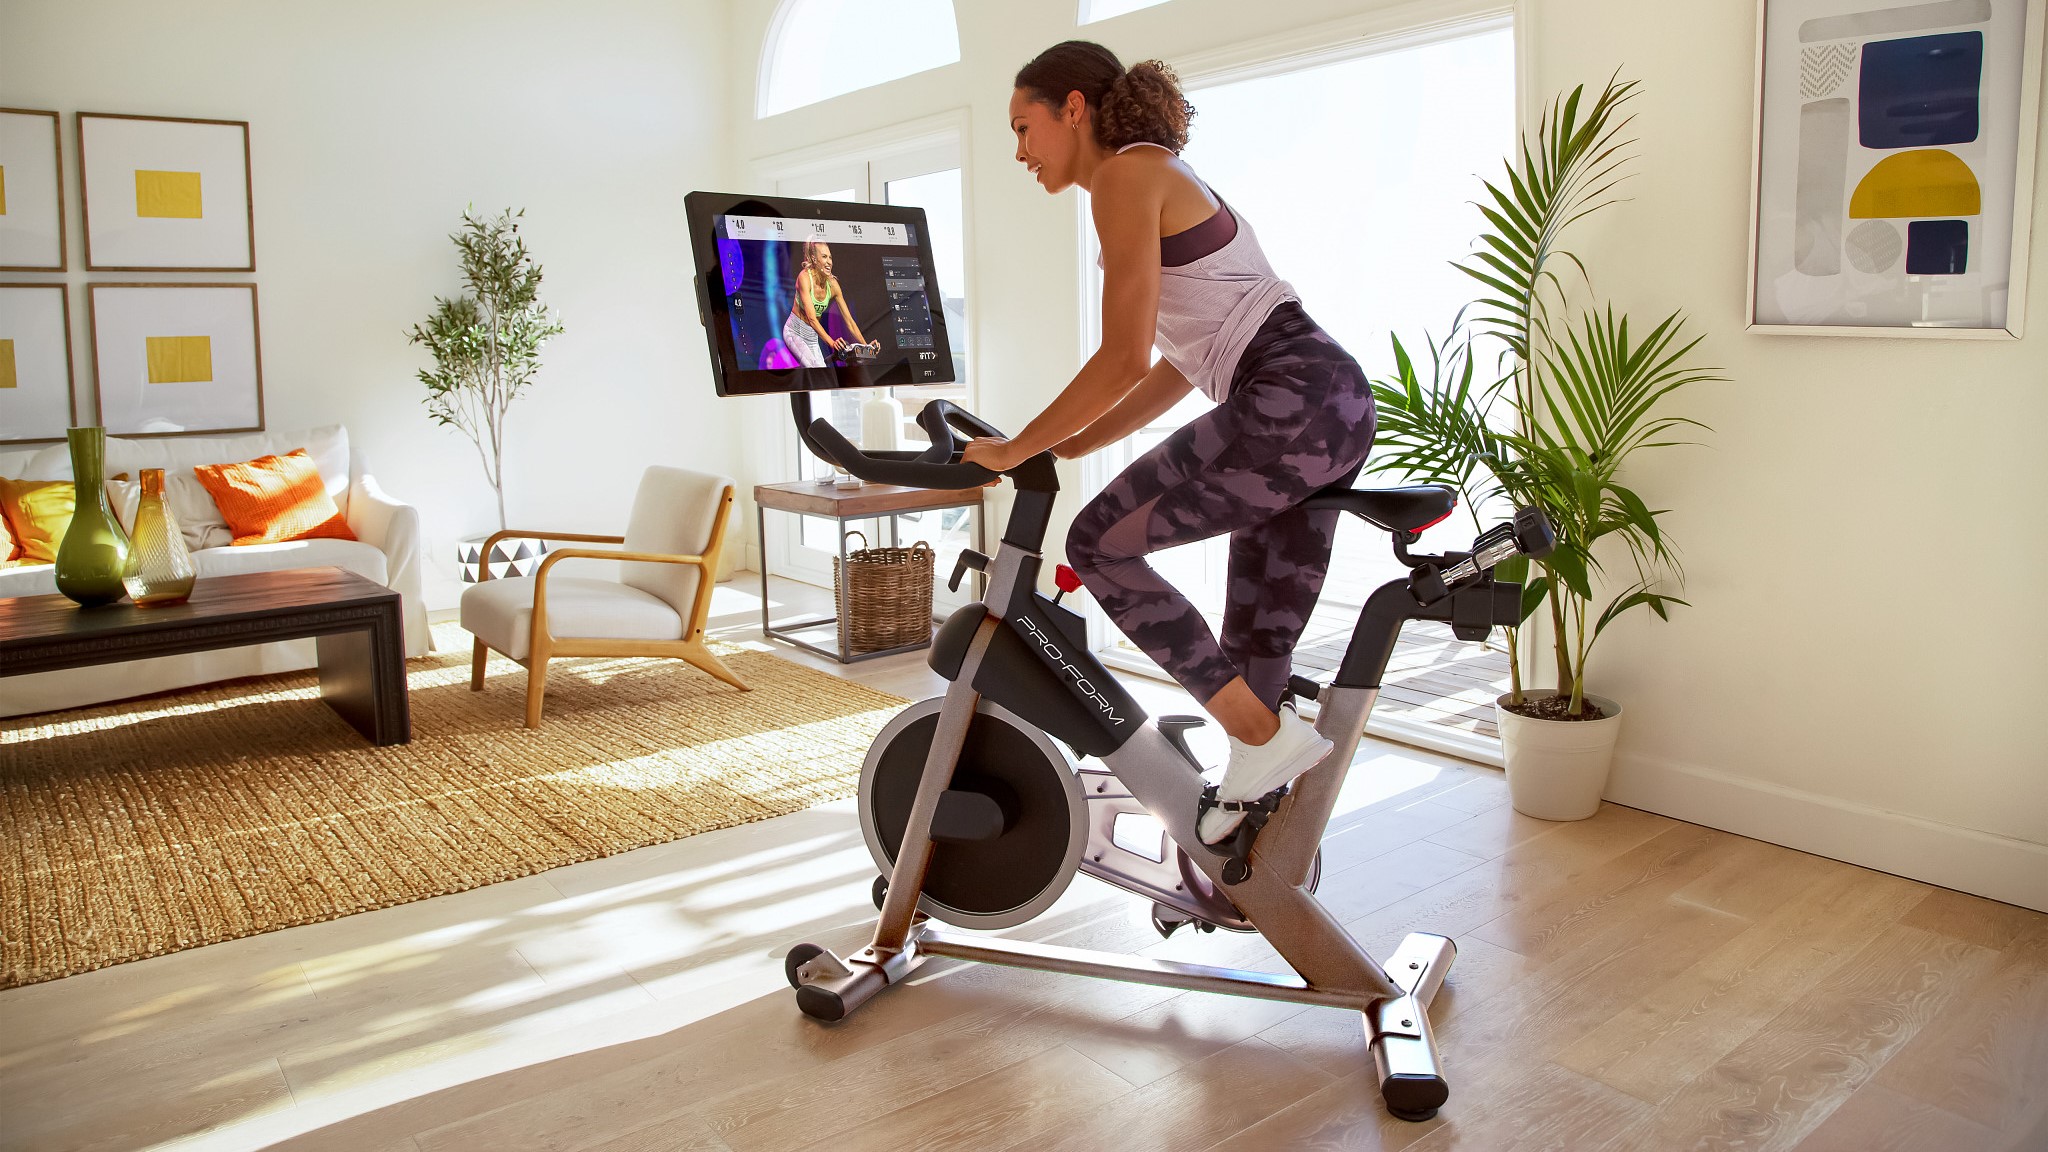 Affordable interactive treadmill, bike and mirror aim to challenge ...